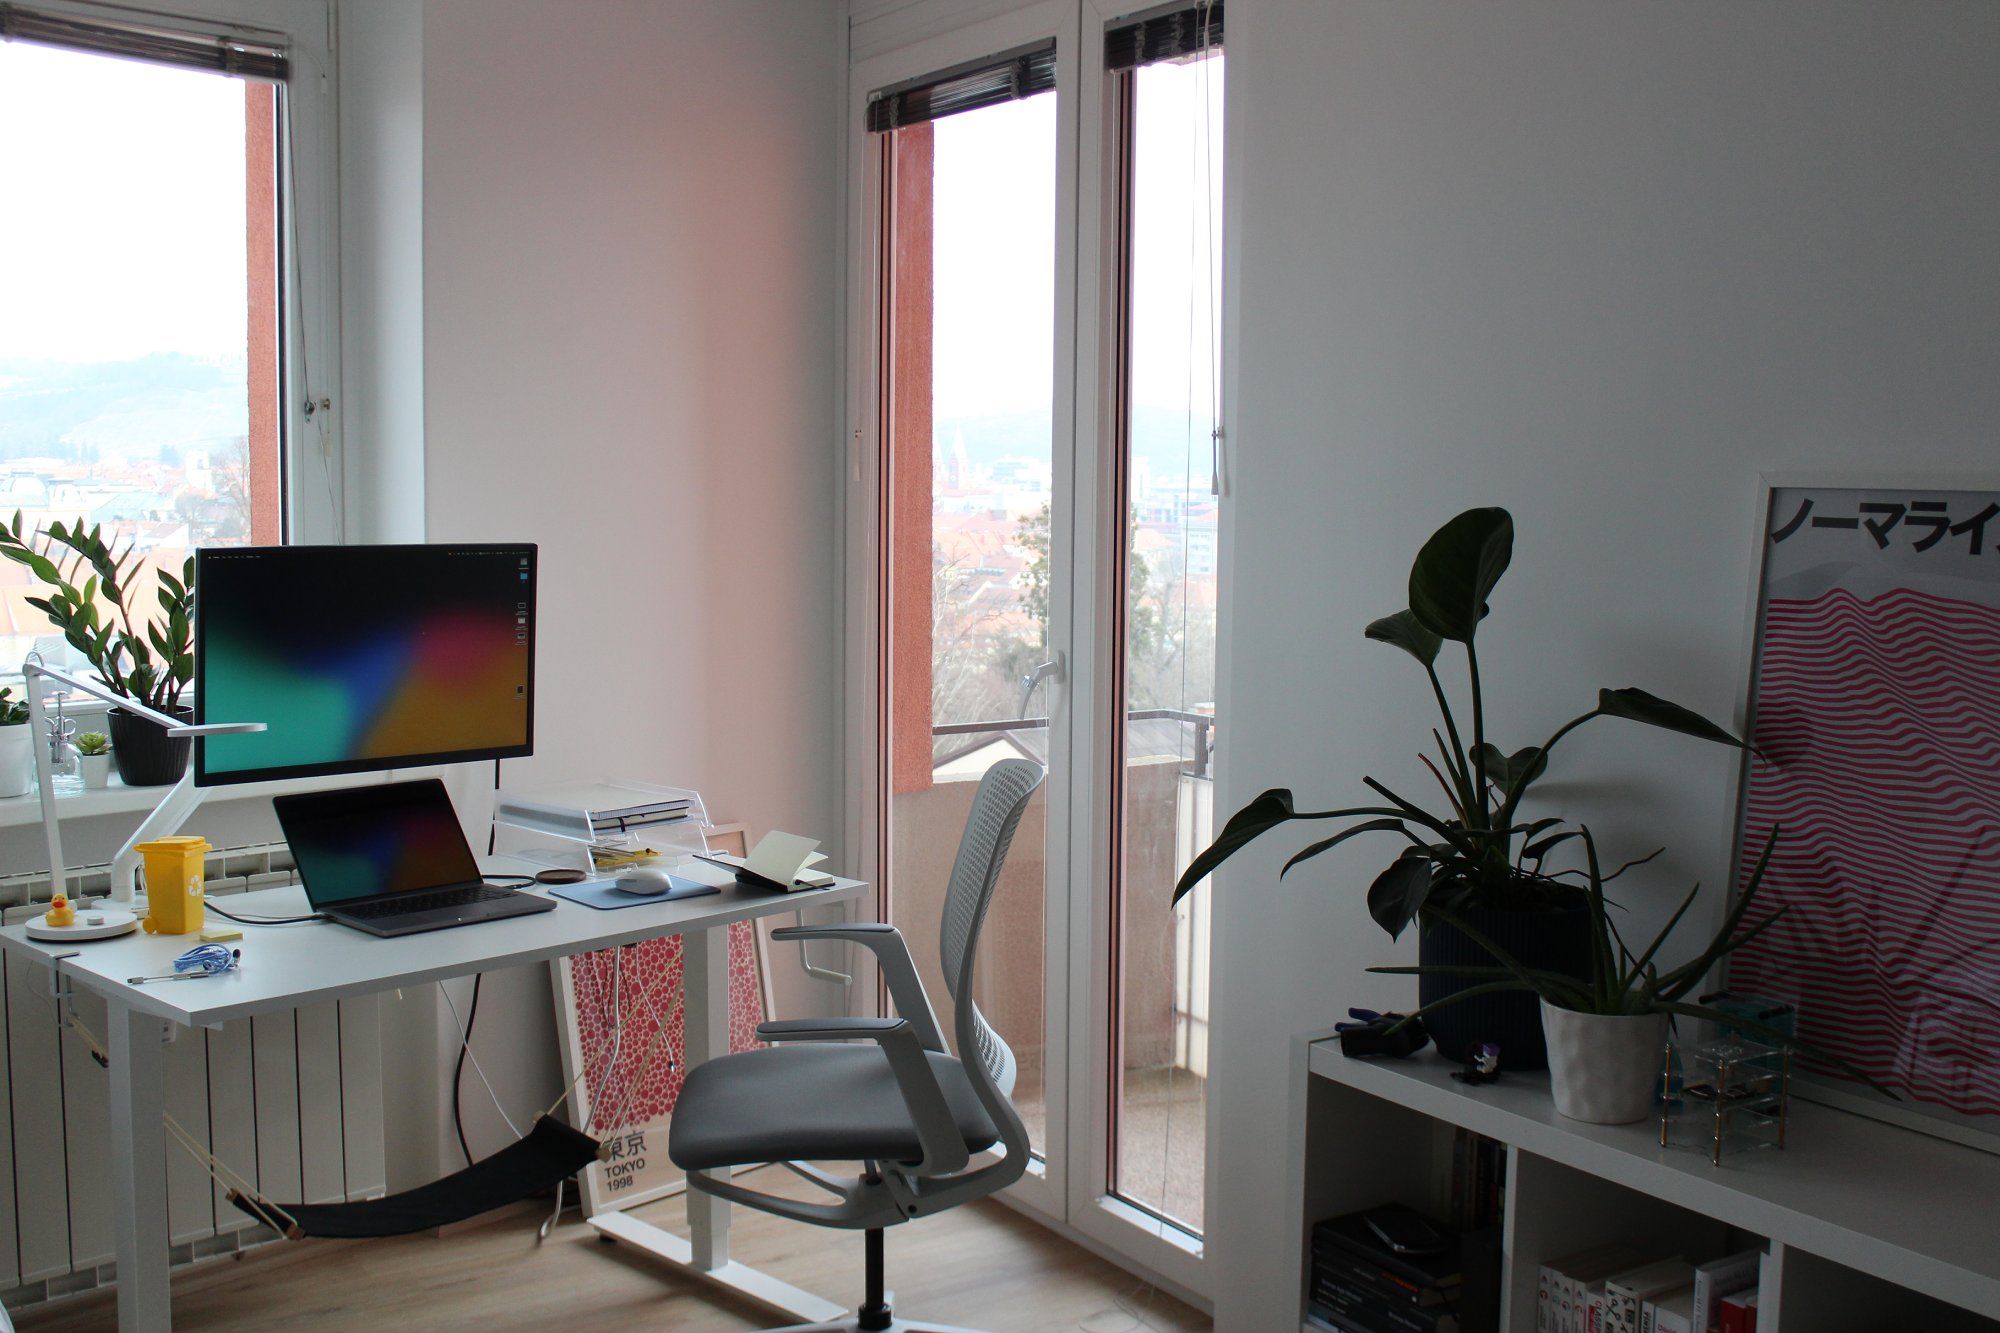 An IKEA standing desk with a footrest hammock in front of the window and next to the balcony door